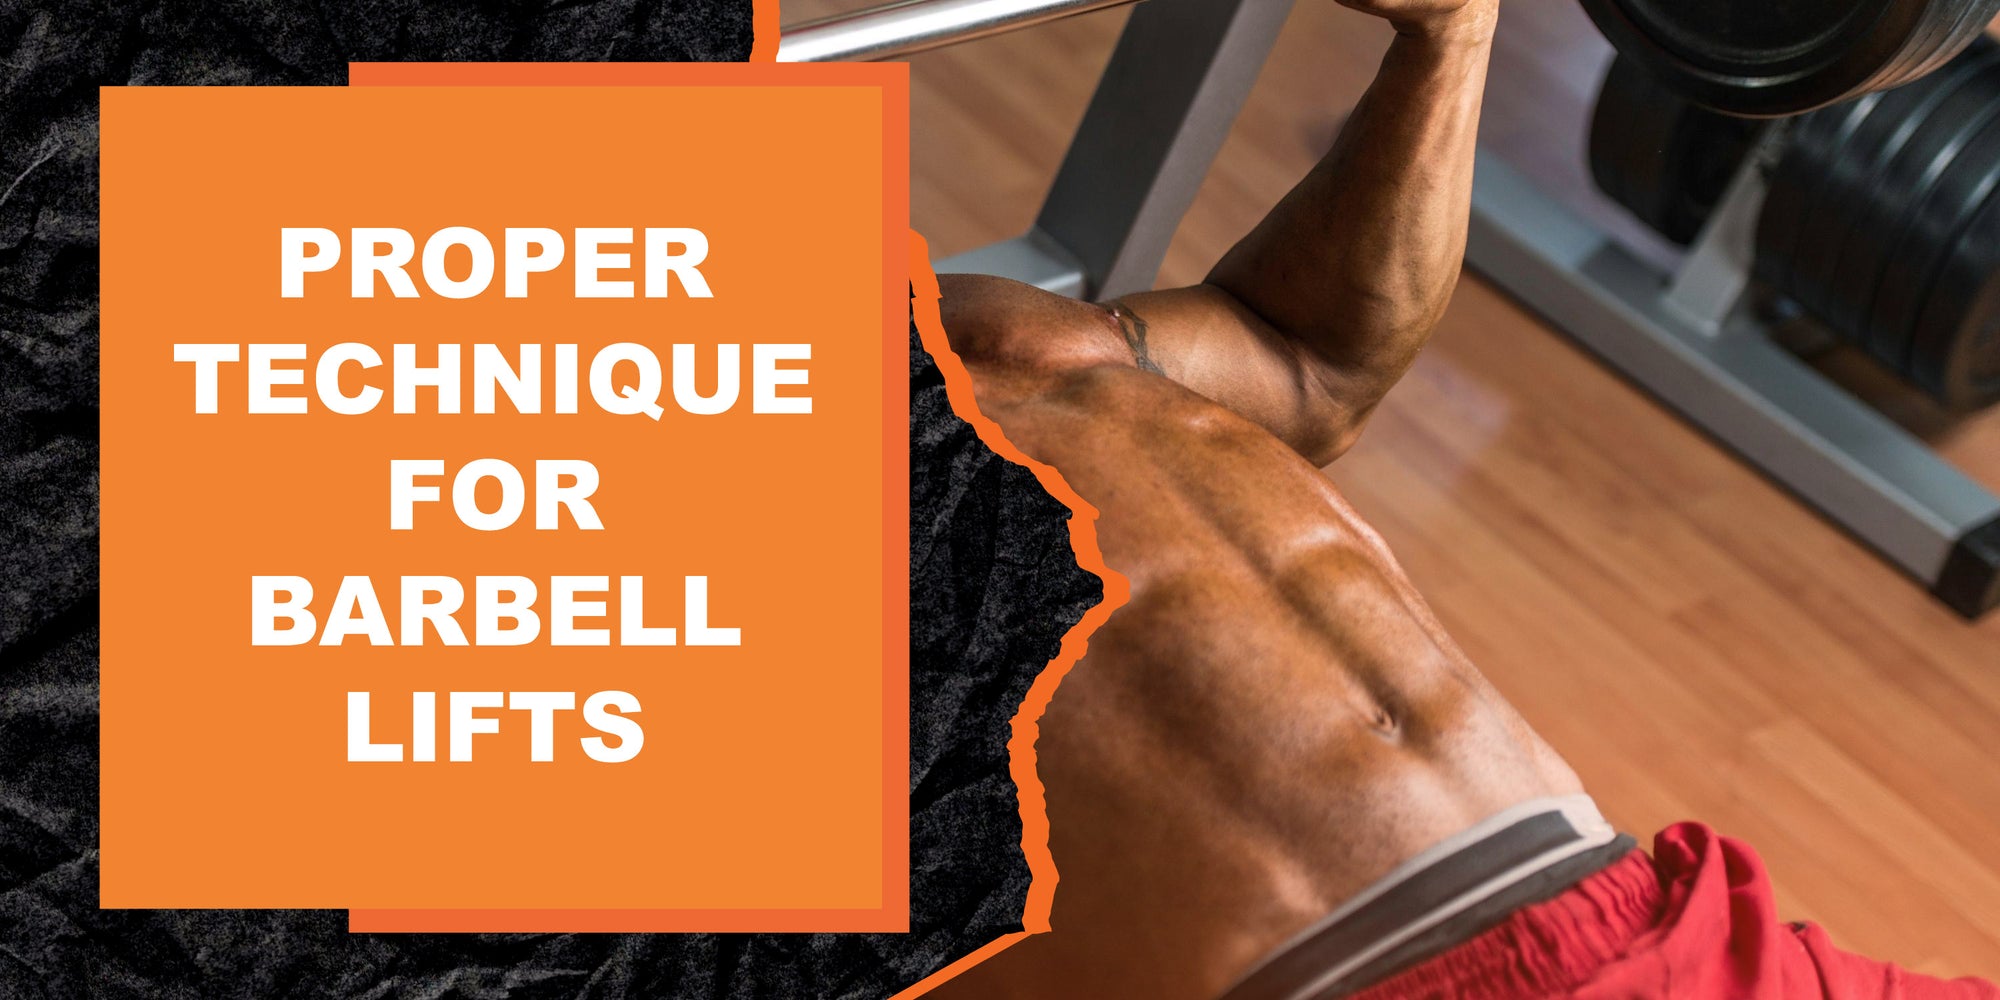 Proper Technique for Barbell Lifts